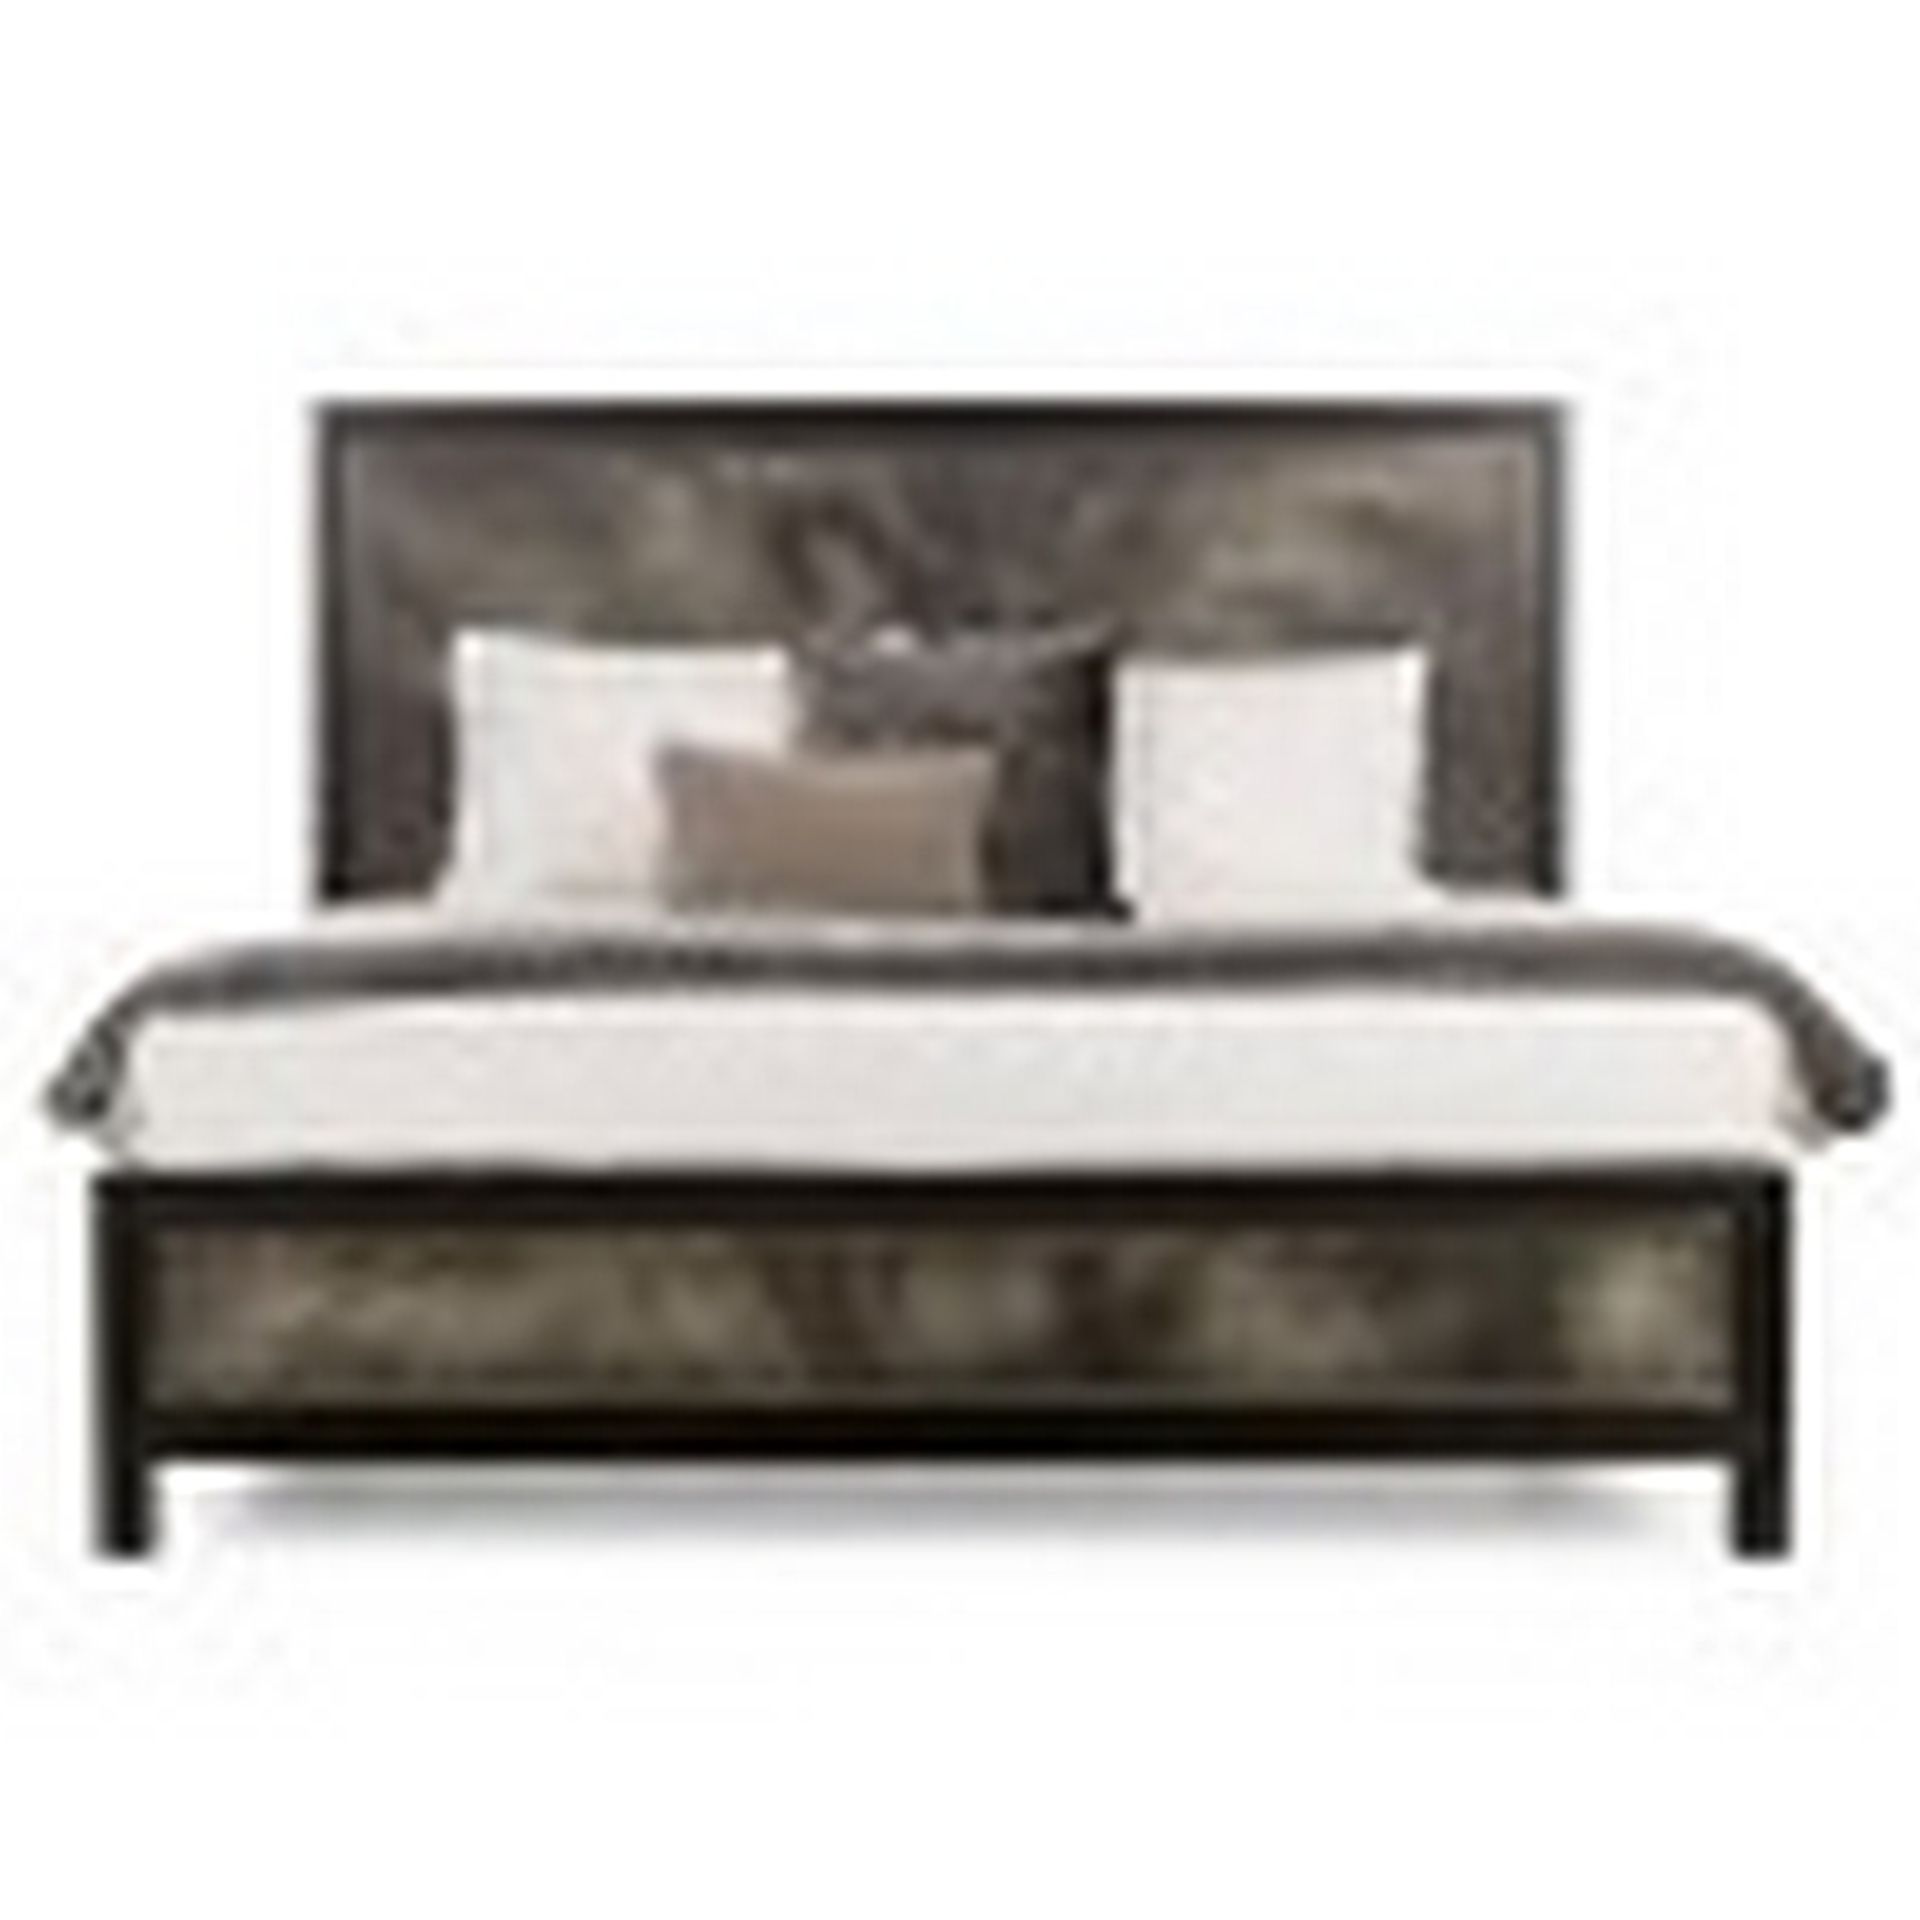 Bed - Levi UK King Size Bed ( Mattress Not Included) Art Deco Style Designer Bed Frame With Ebonized